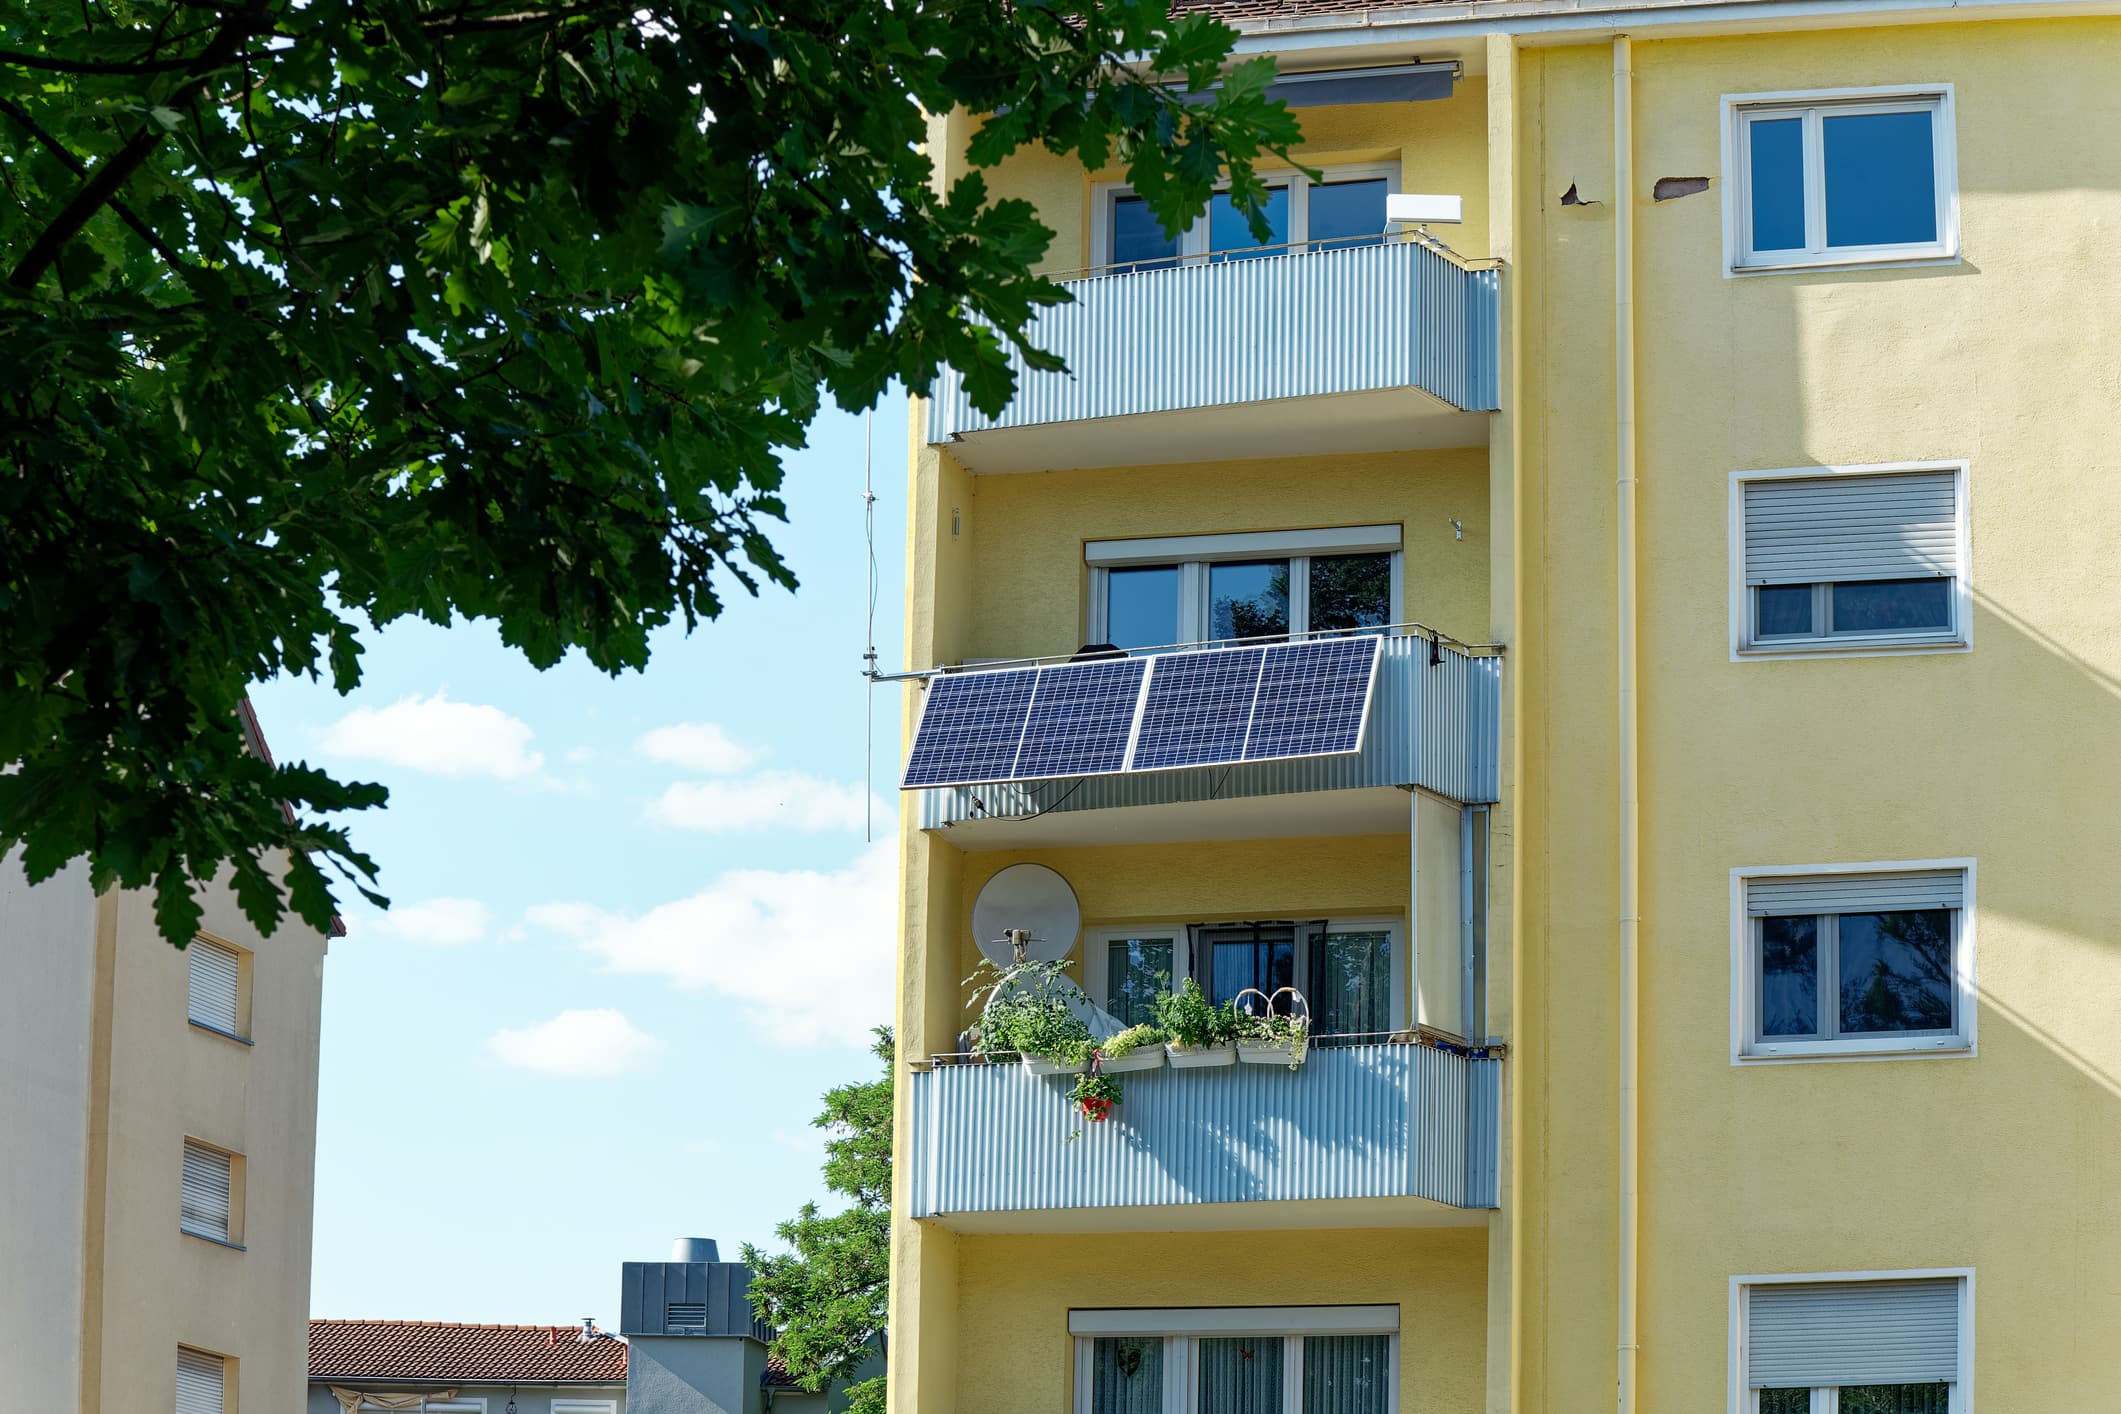 A balcony solar system on the exterior of an apartment block.